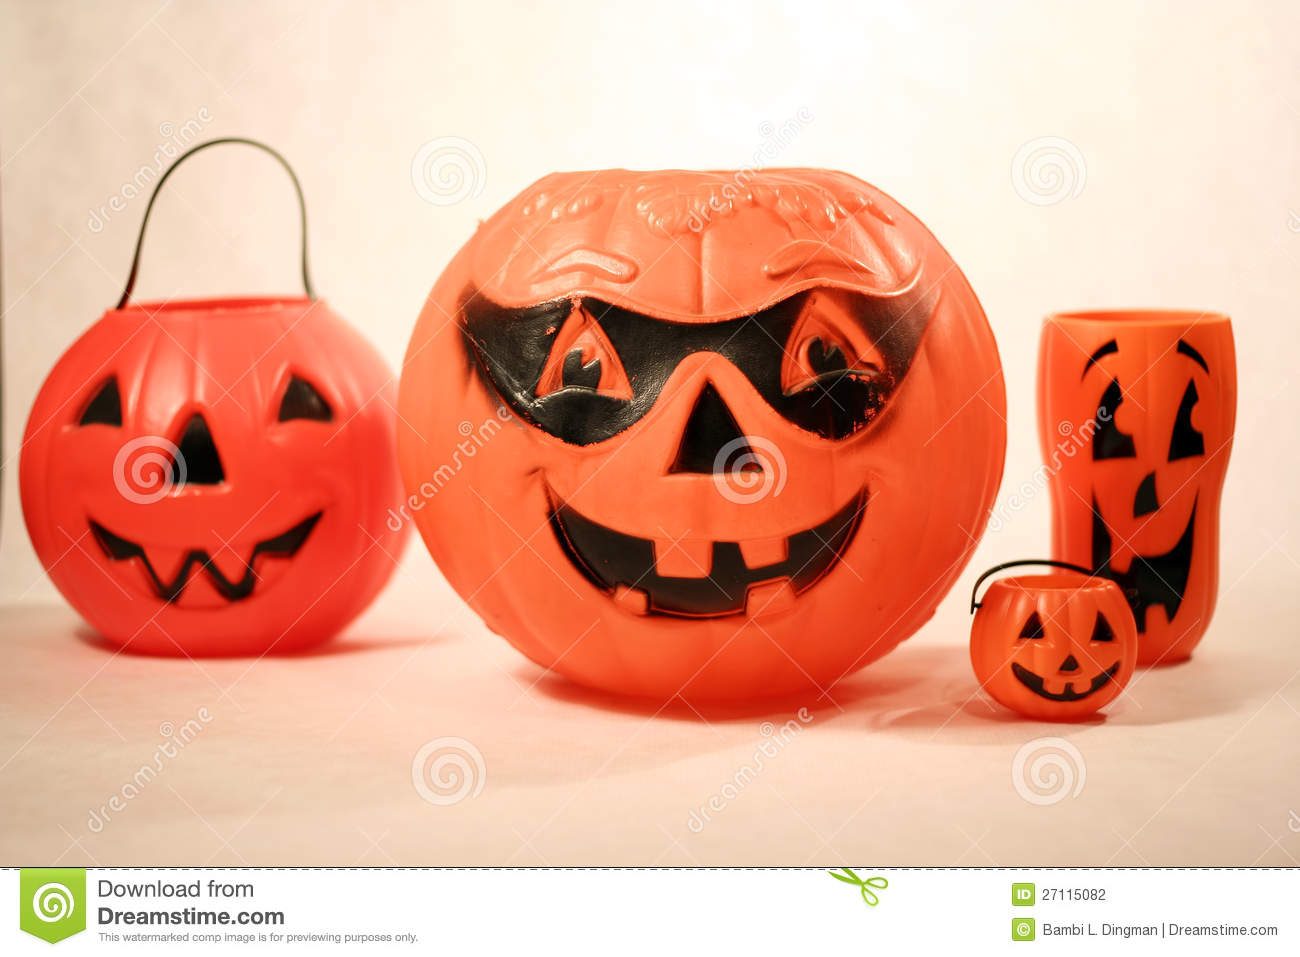 Grouping Of Plastic Pumpkins And Jack O Lanterns Form A Halloween